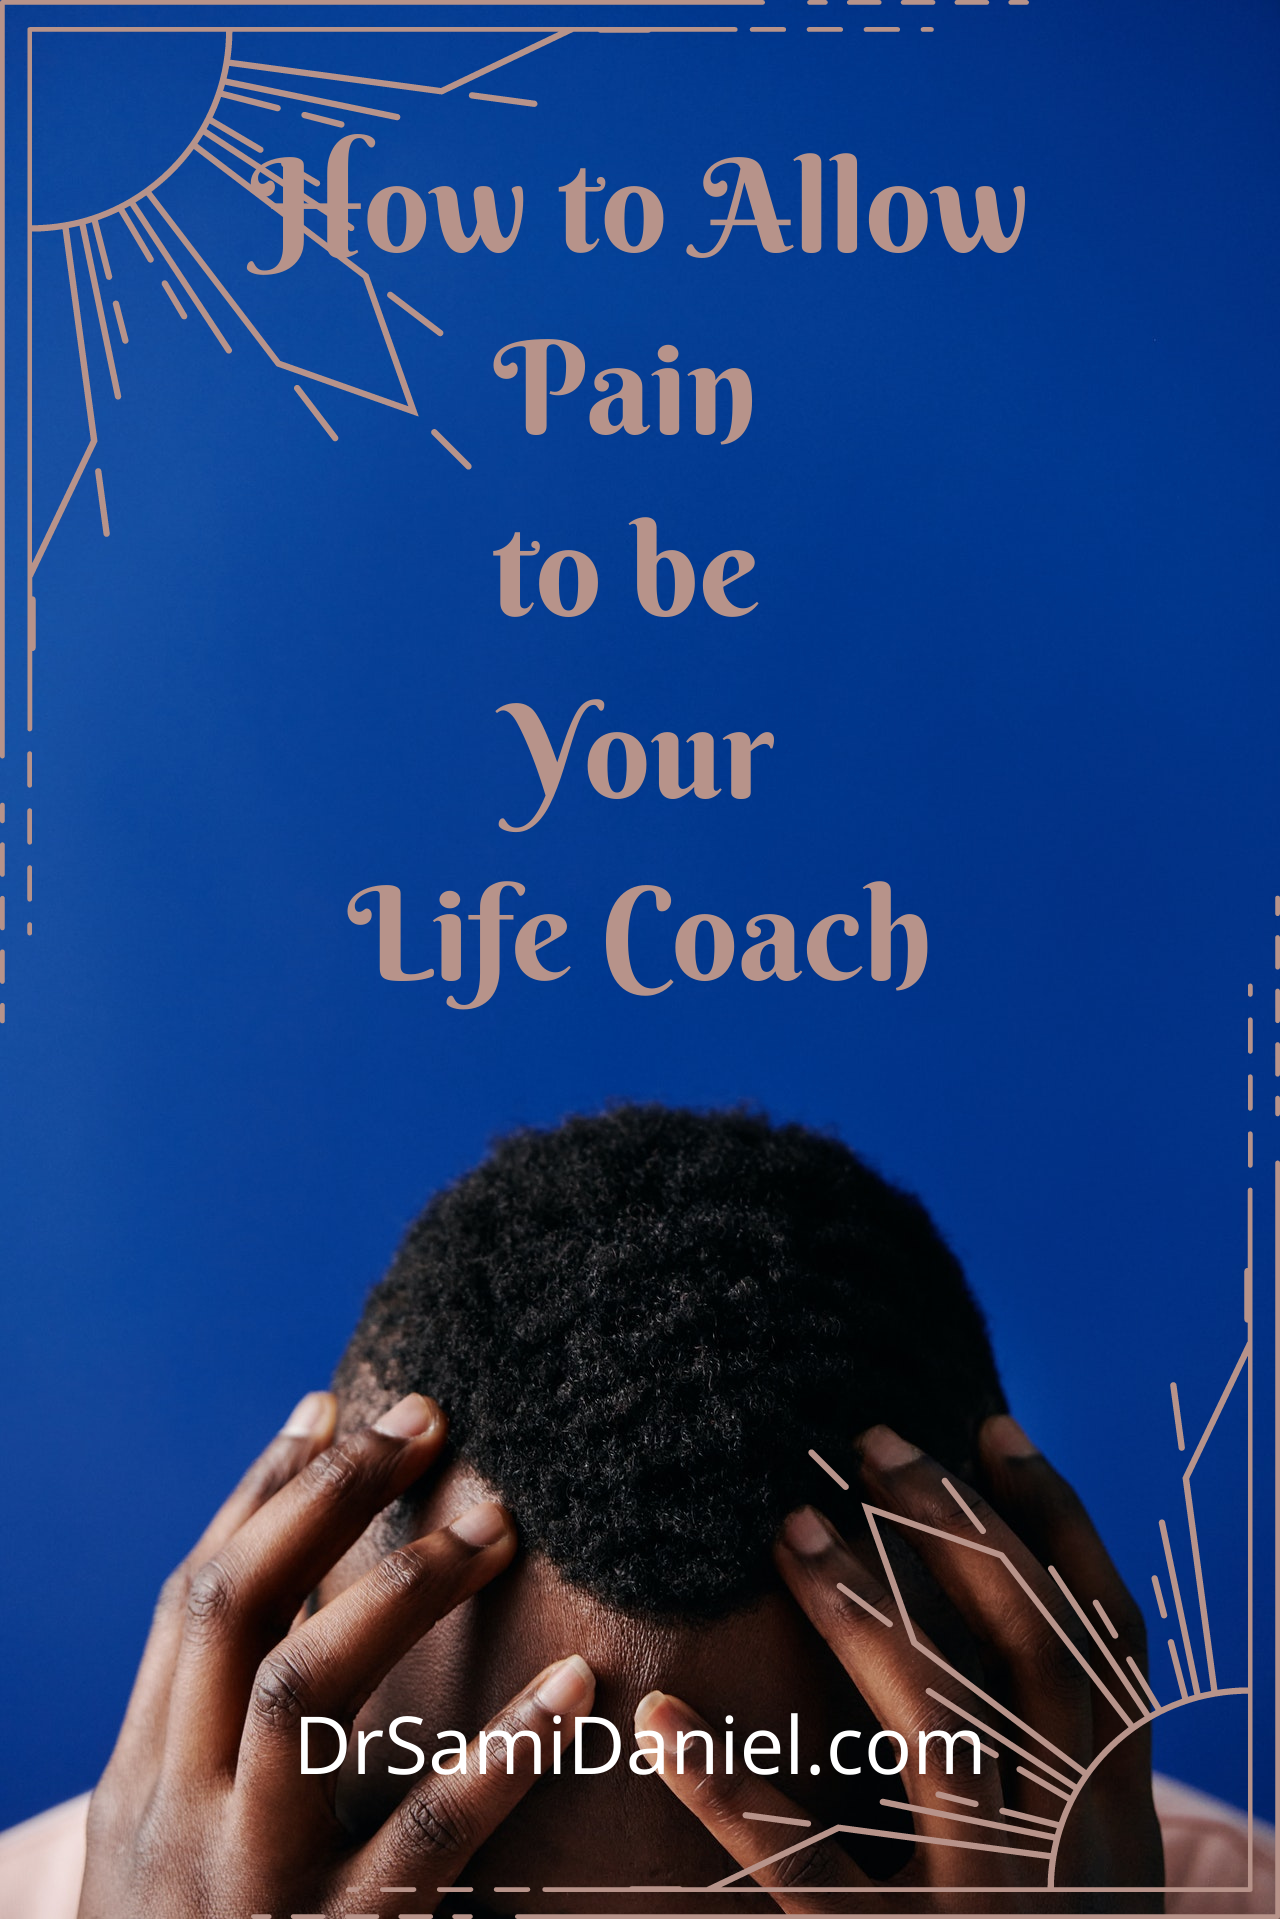 How to allow pain to be your life coach or teacher